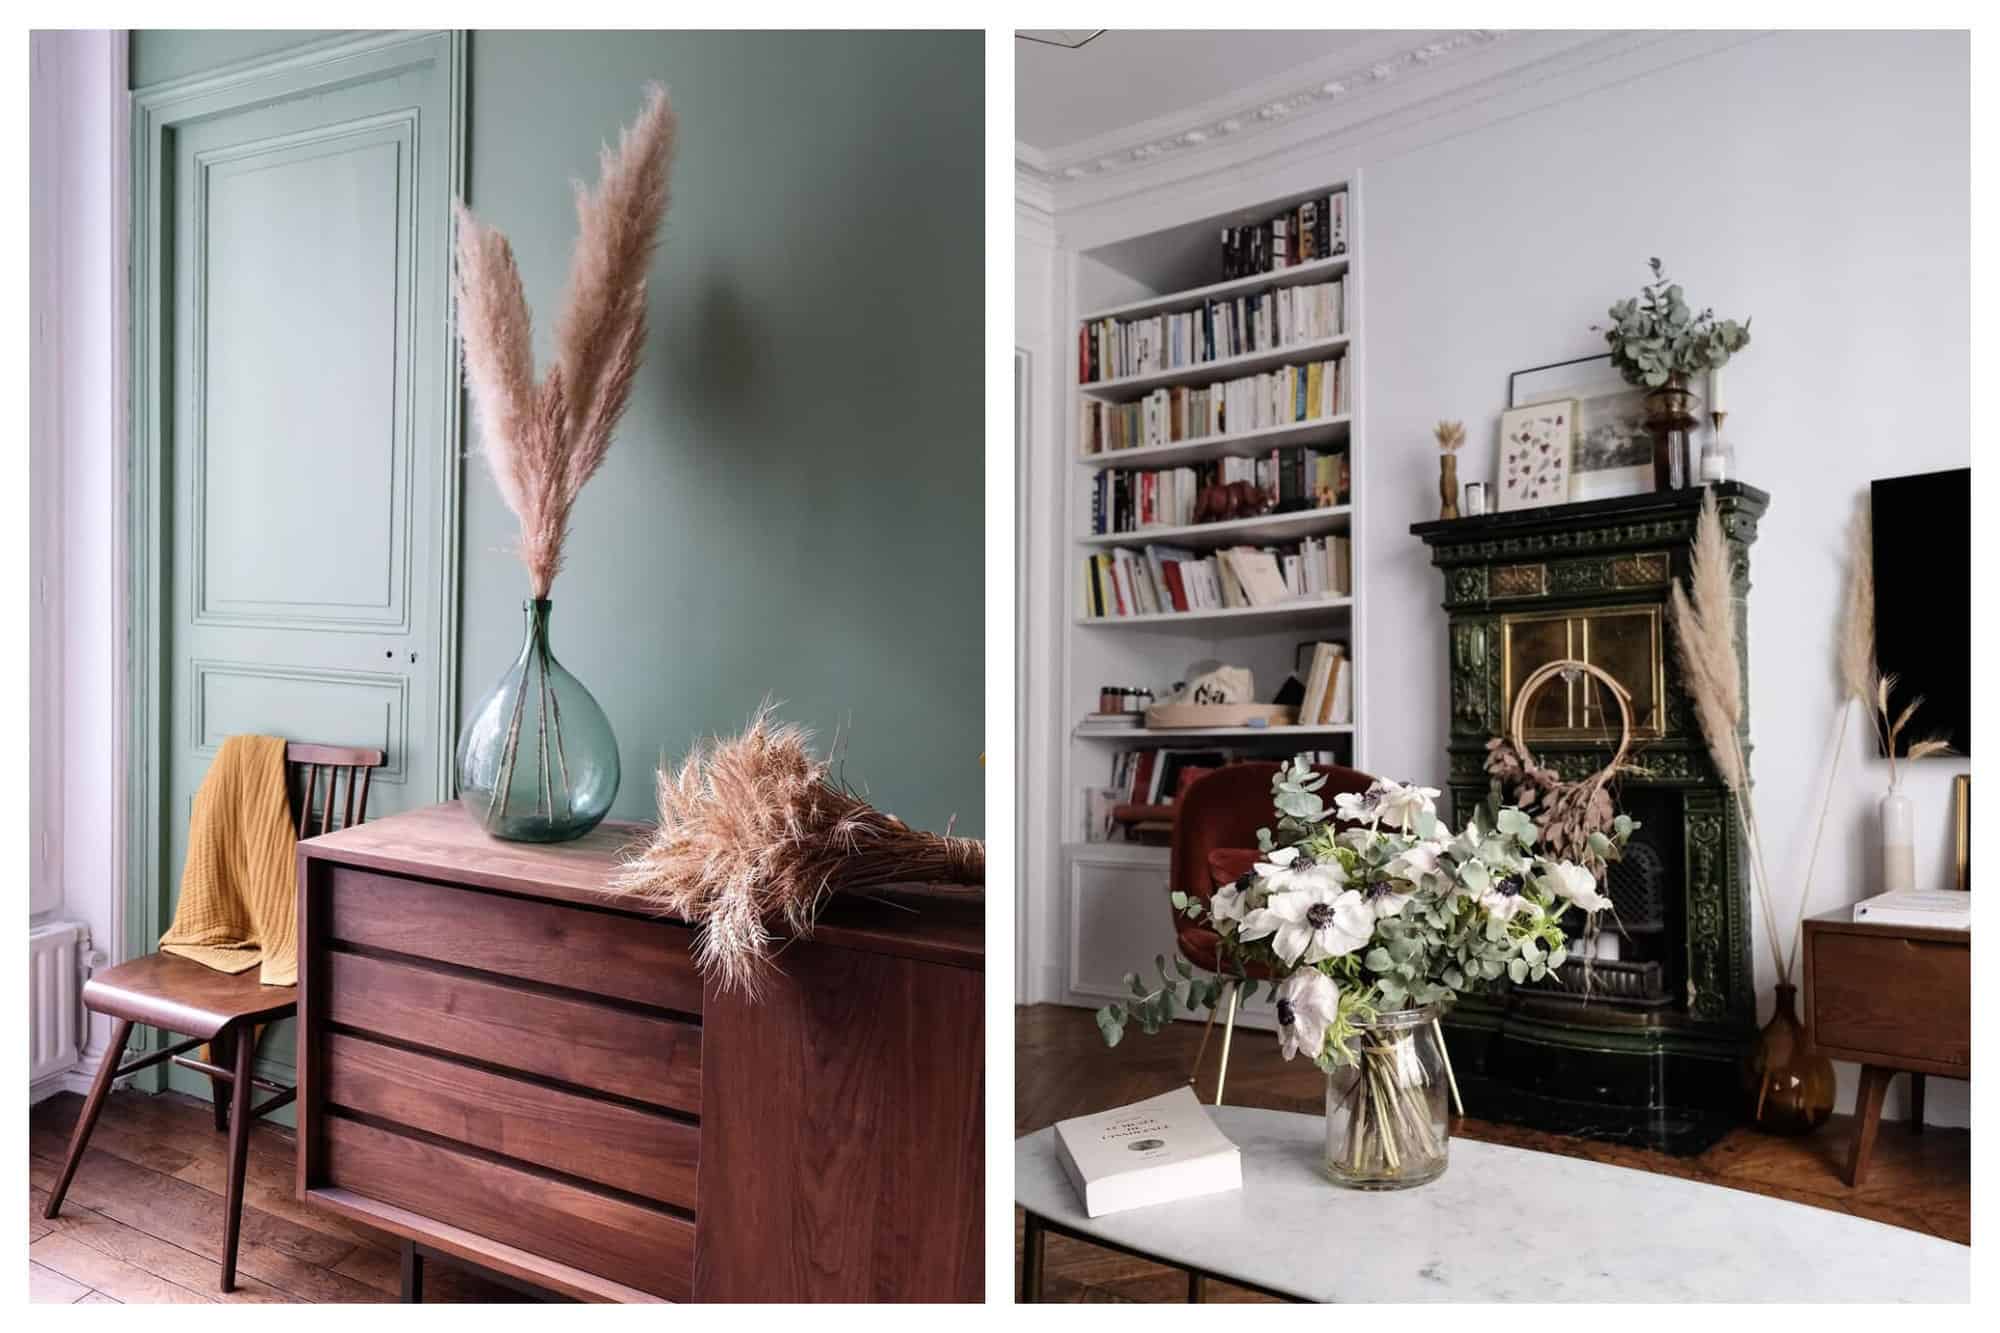 Left: A teal room is pictured with a dark wooden chair and dresser. On top of the dresser there is a large teal vase with dried pink flowers, and some dried wheat next to it. Right: A well decorated white room including a large bookshelf built into the wall and filled with books, a white marble table with a vase of dried flowers and a small, dark vintage fireplace.   